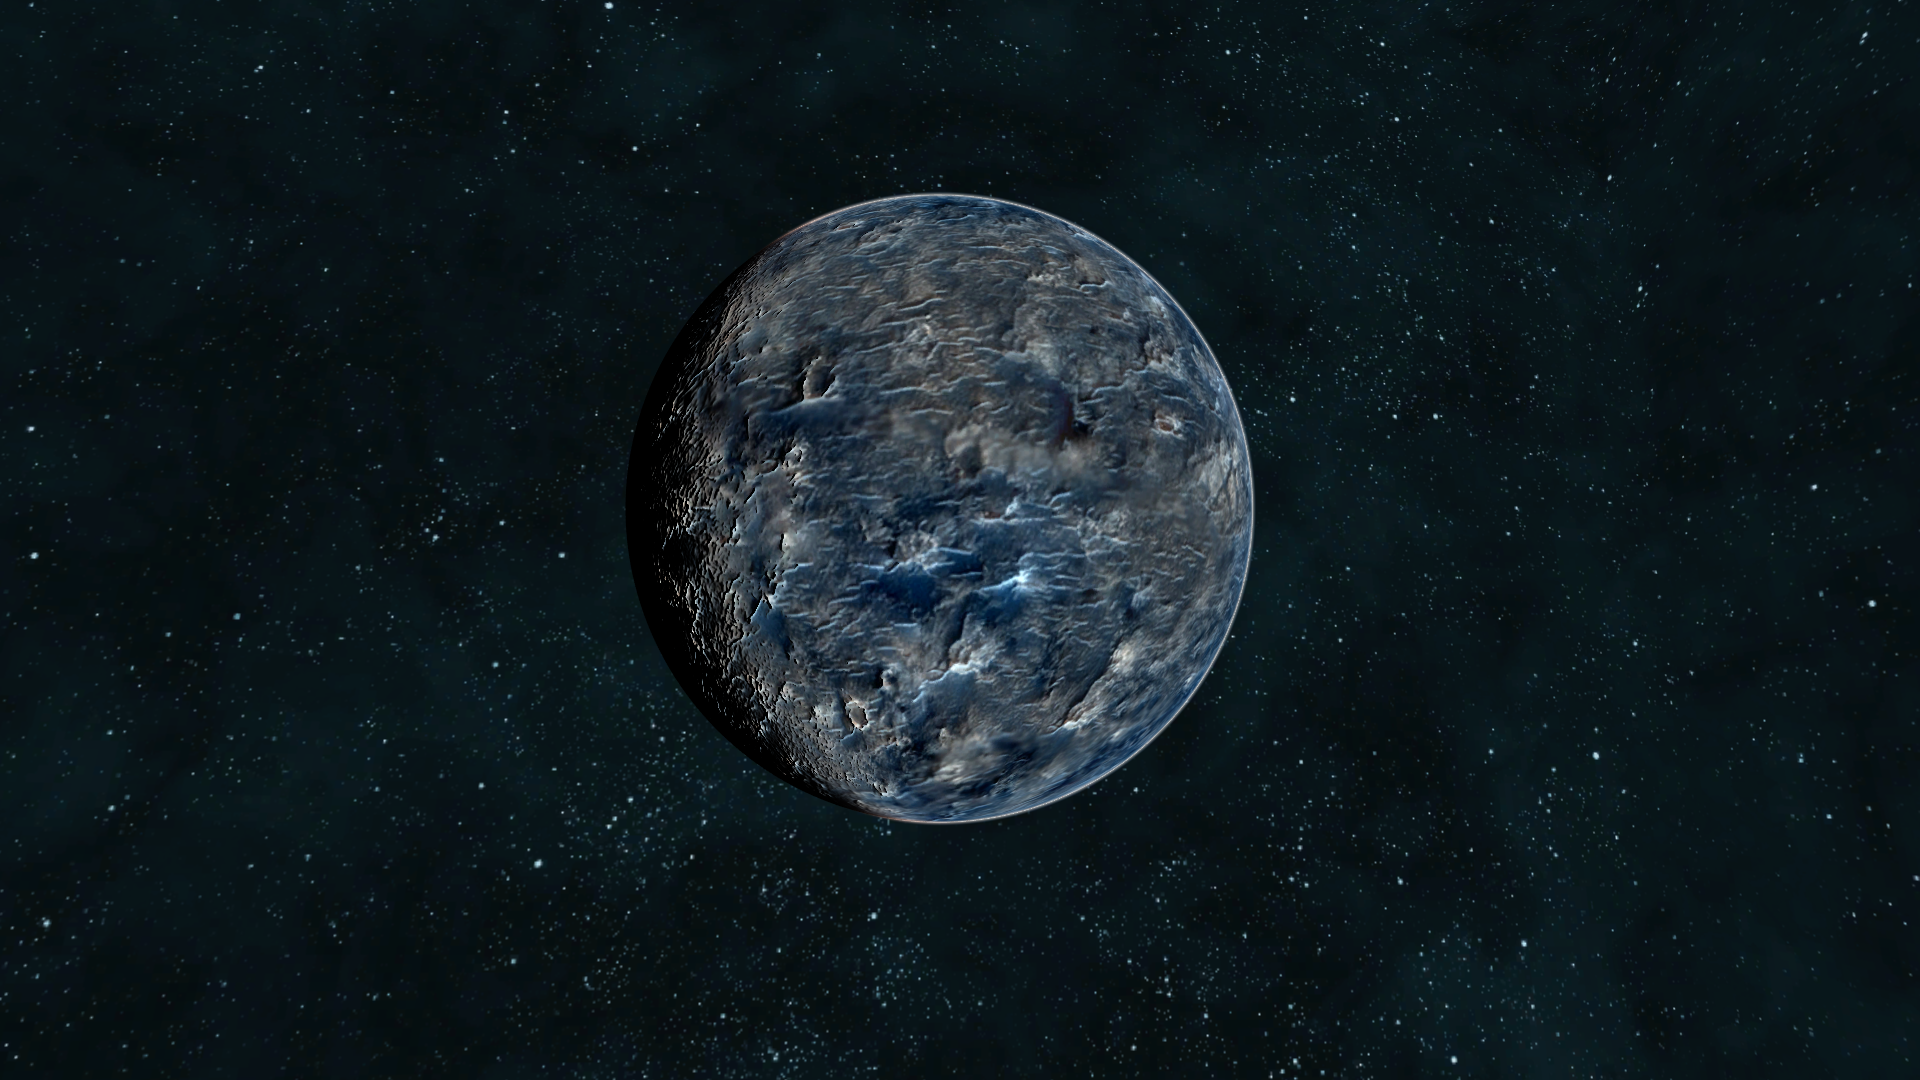 star trek online planets you can visit